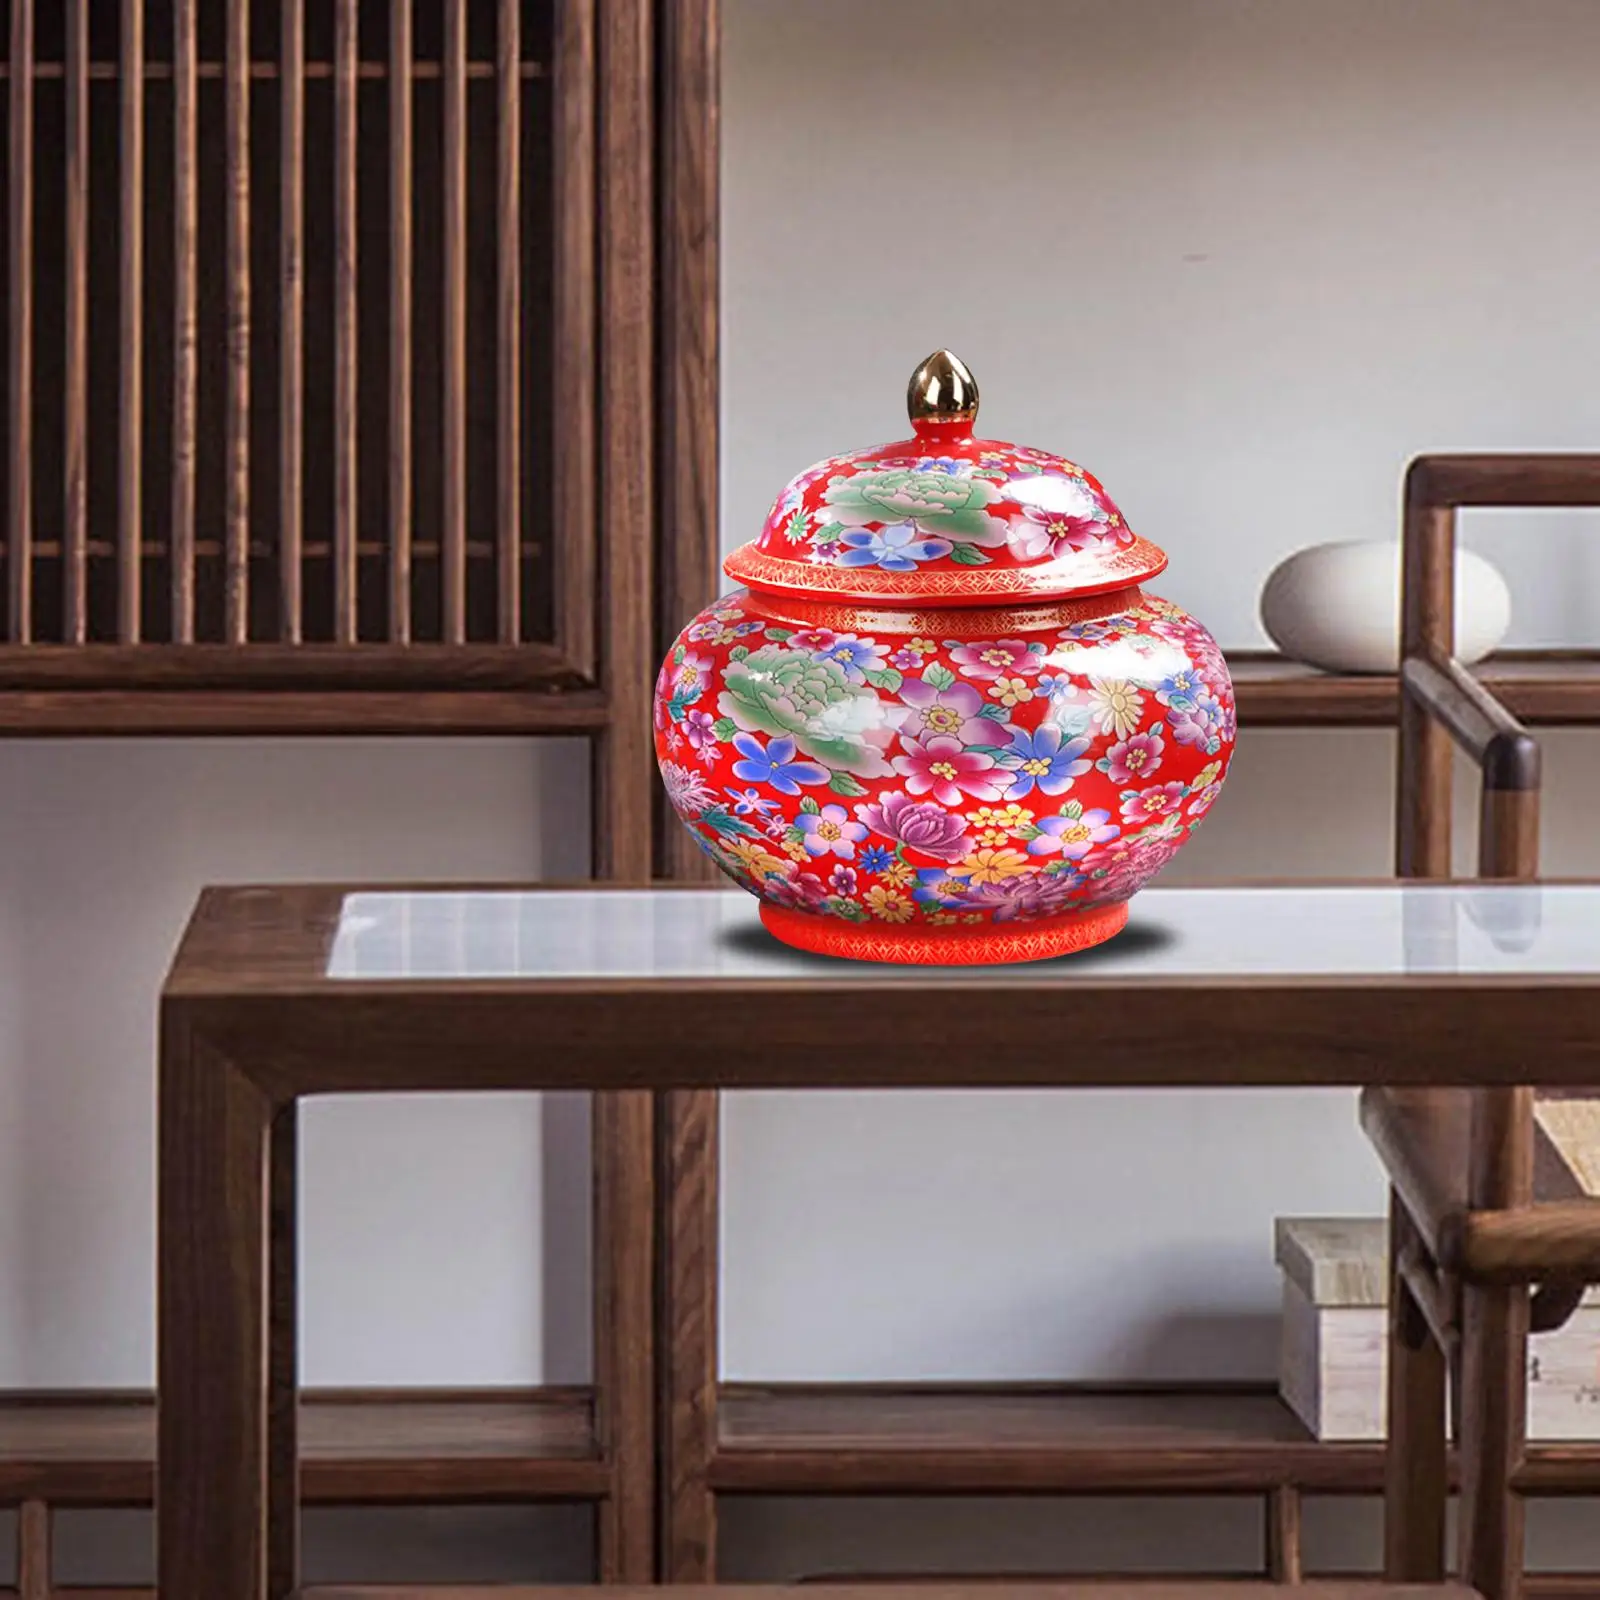 Porcelain Colour Enamel Tea Storage Container Ginger Jar 14x14cm Small Size Multipurpose Chinese Style with Lid for Kitchen